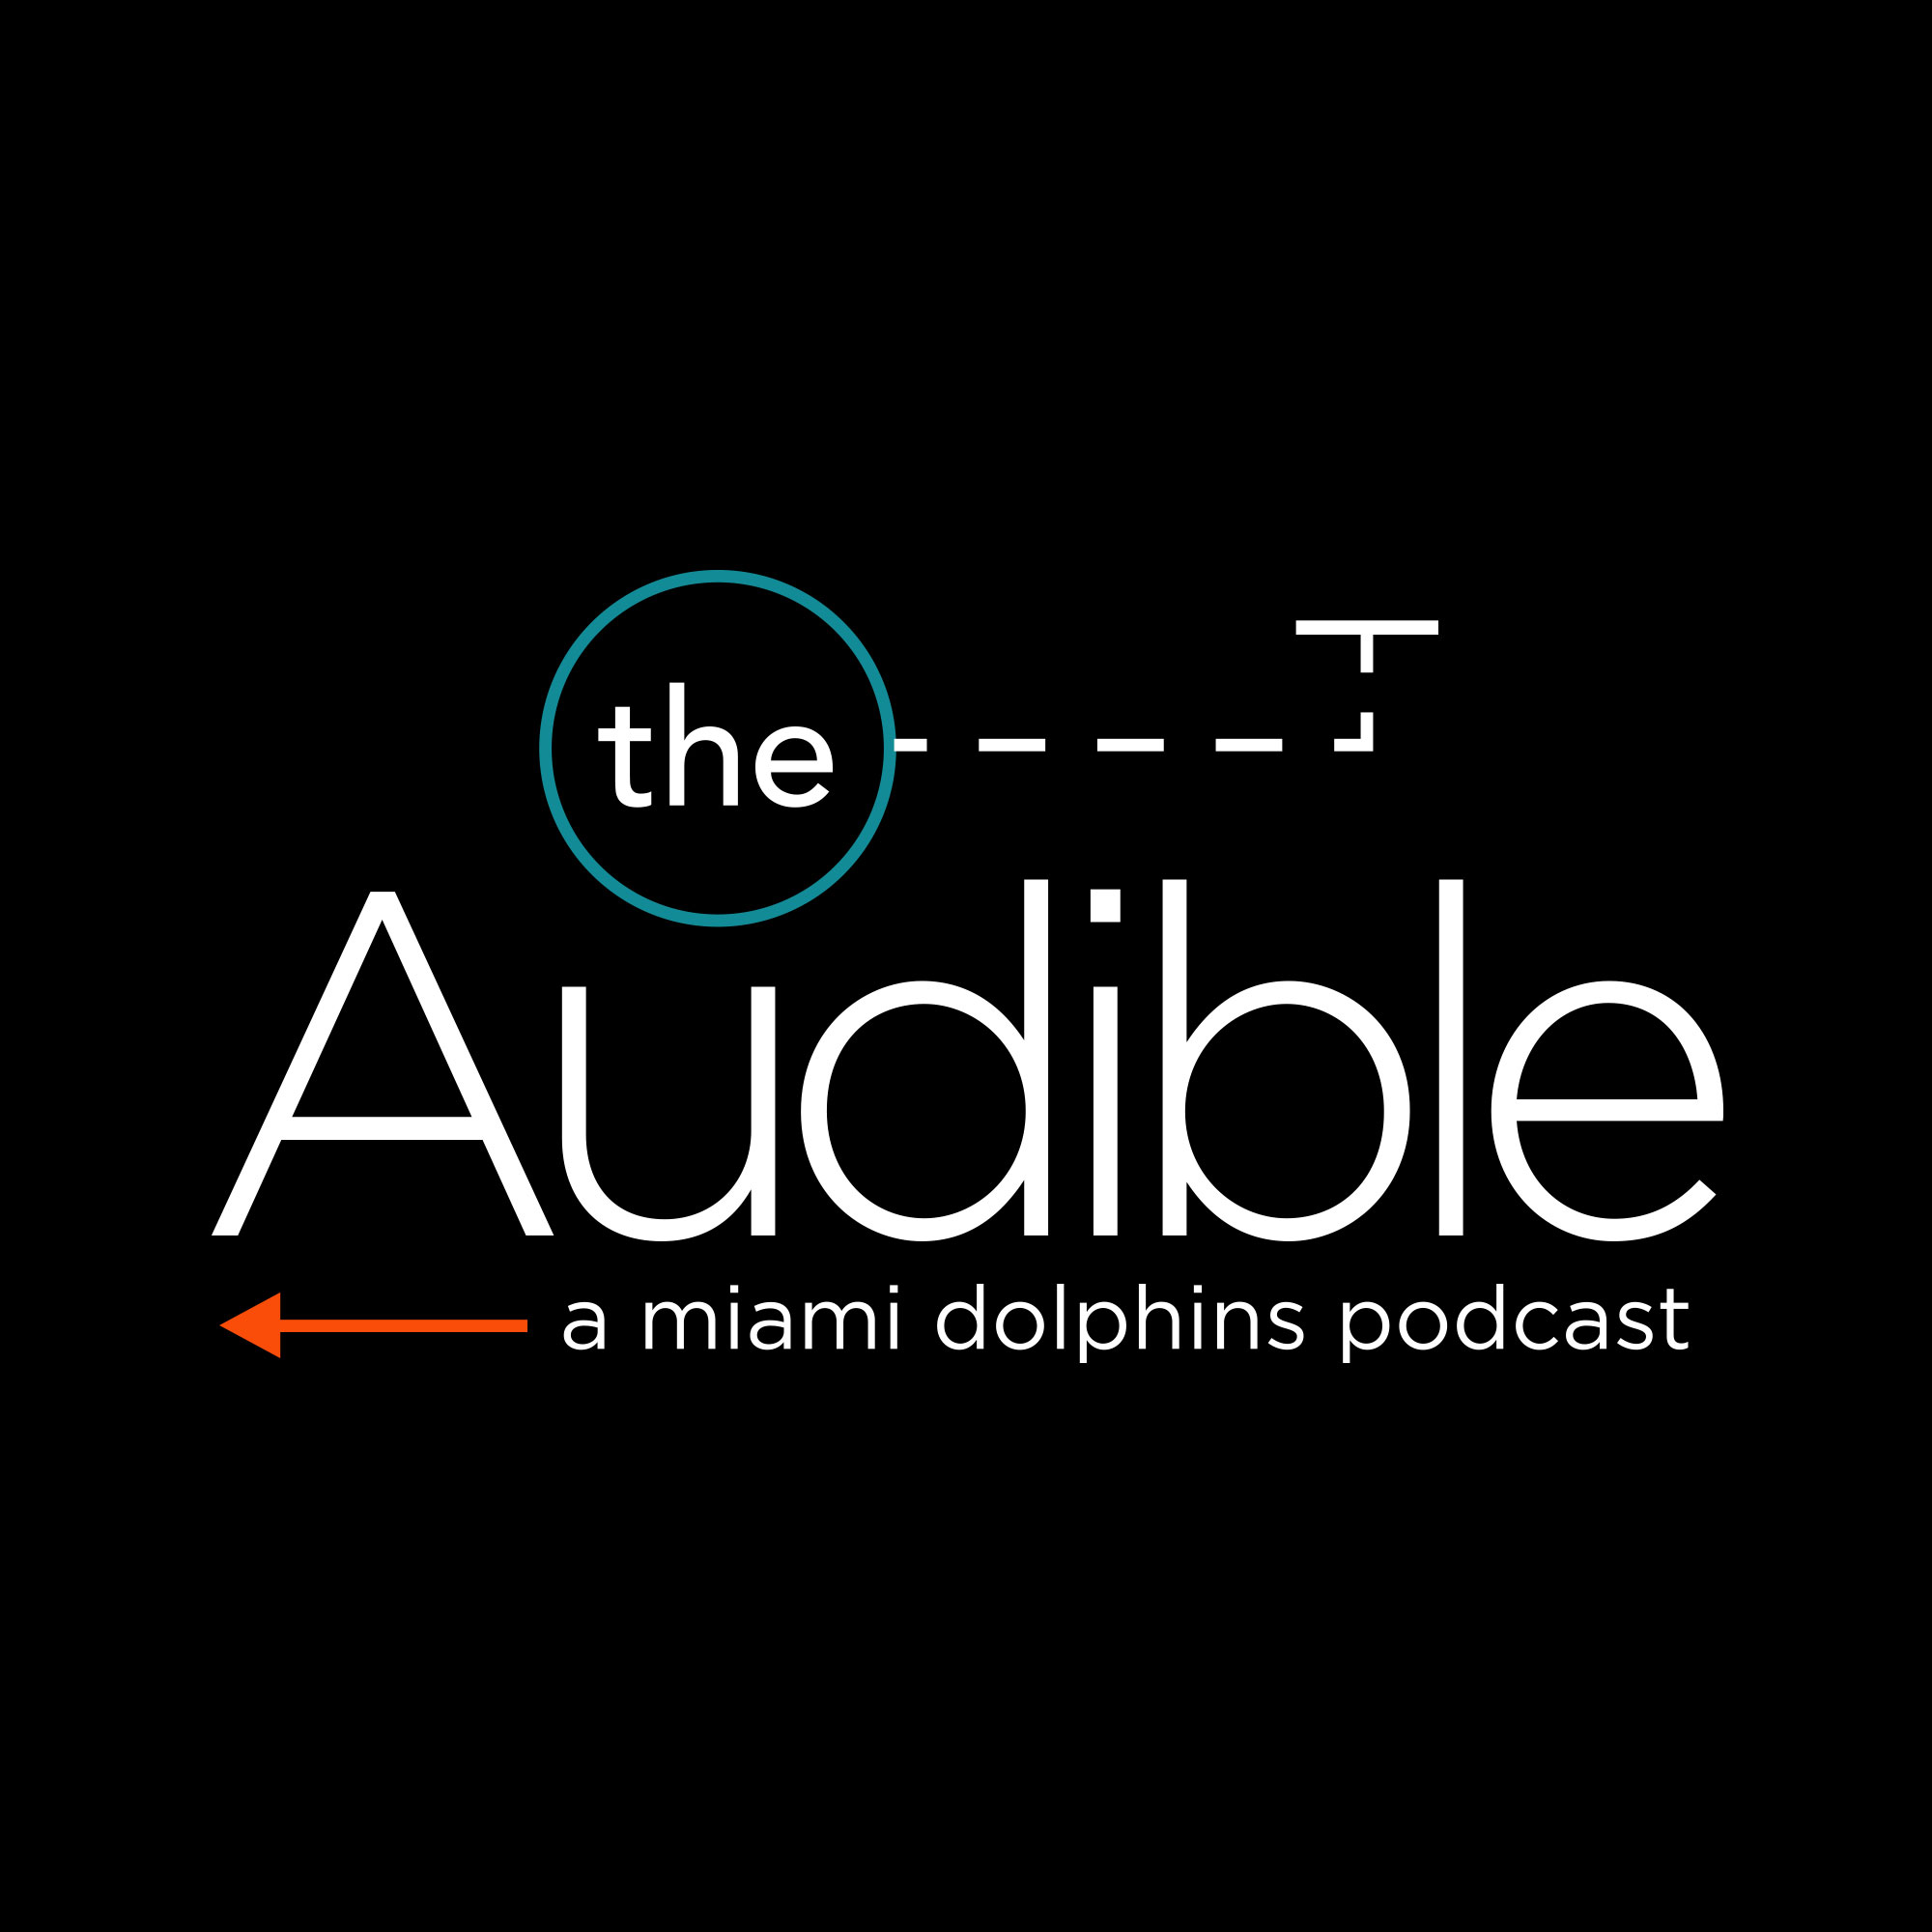 2021 Schedule Release | The Audible Episode 155